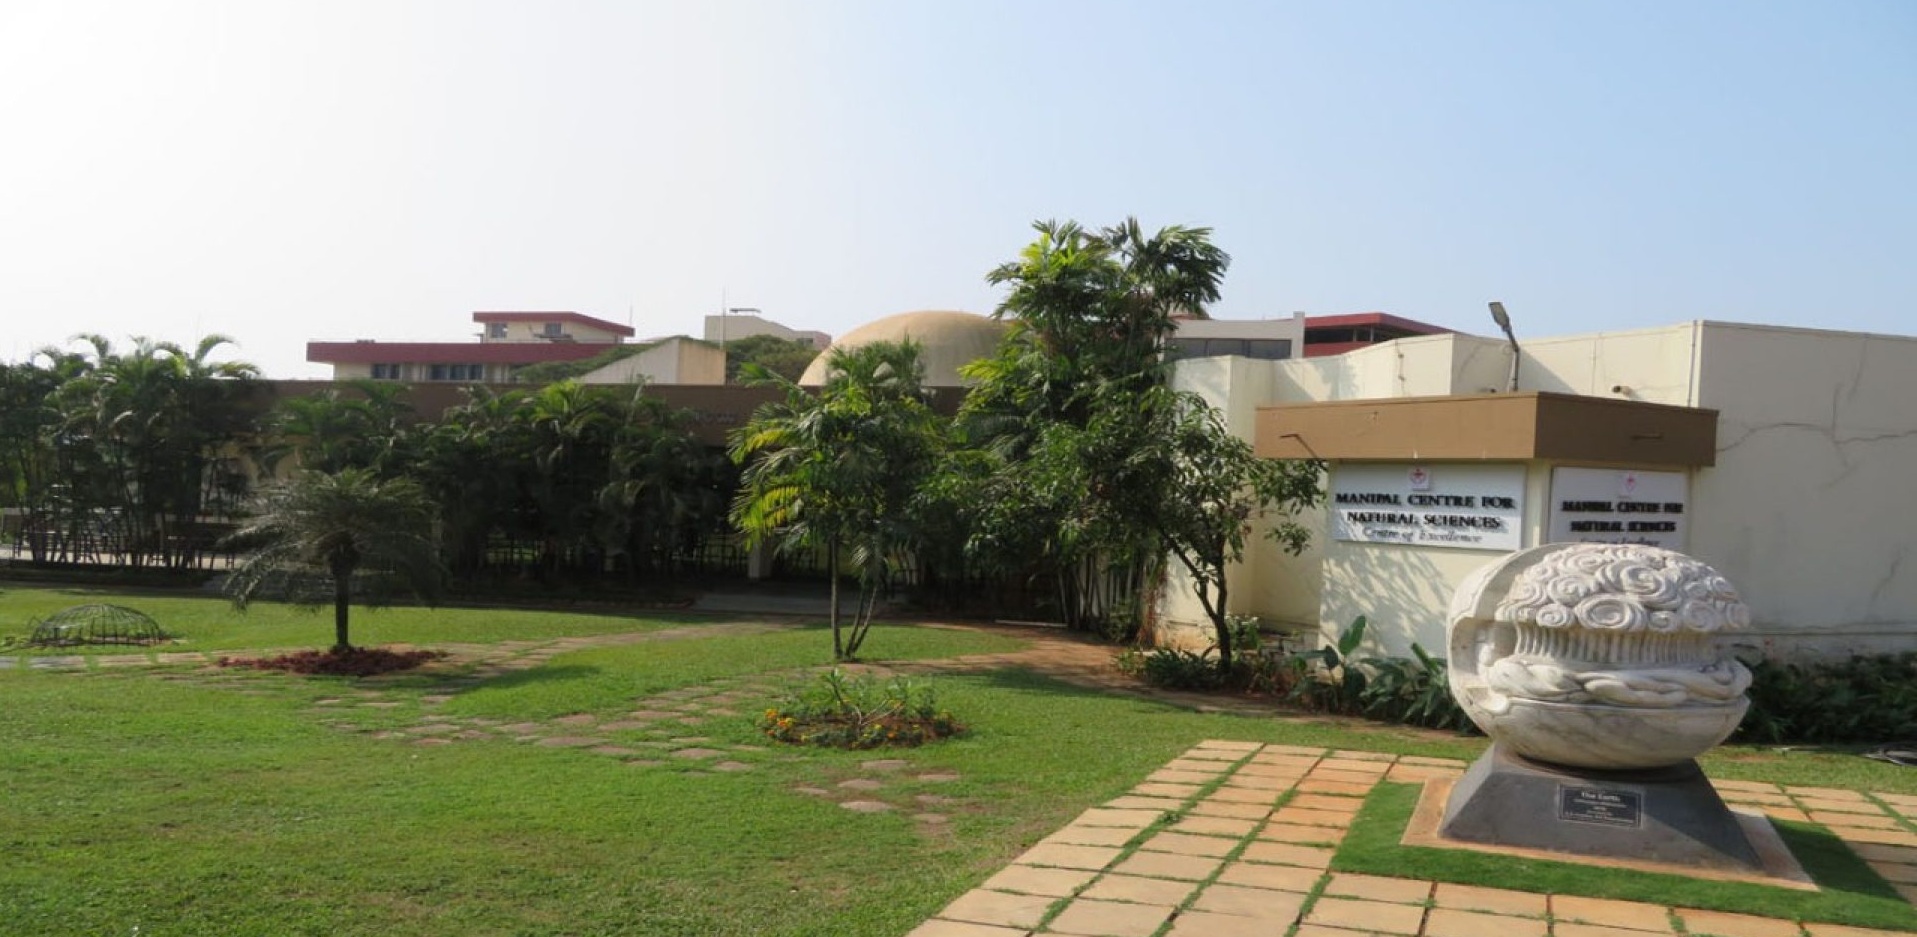 Manipal college of Natural Sciences, Manipal